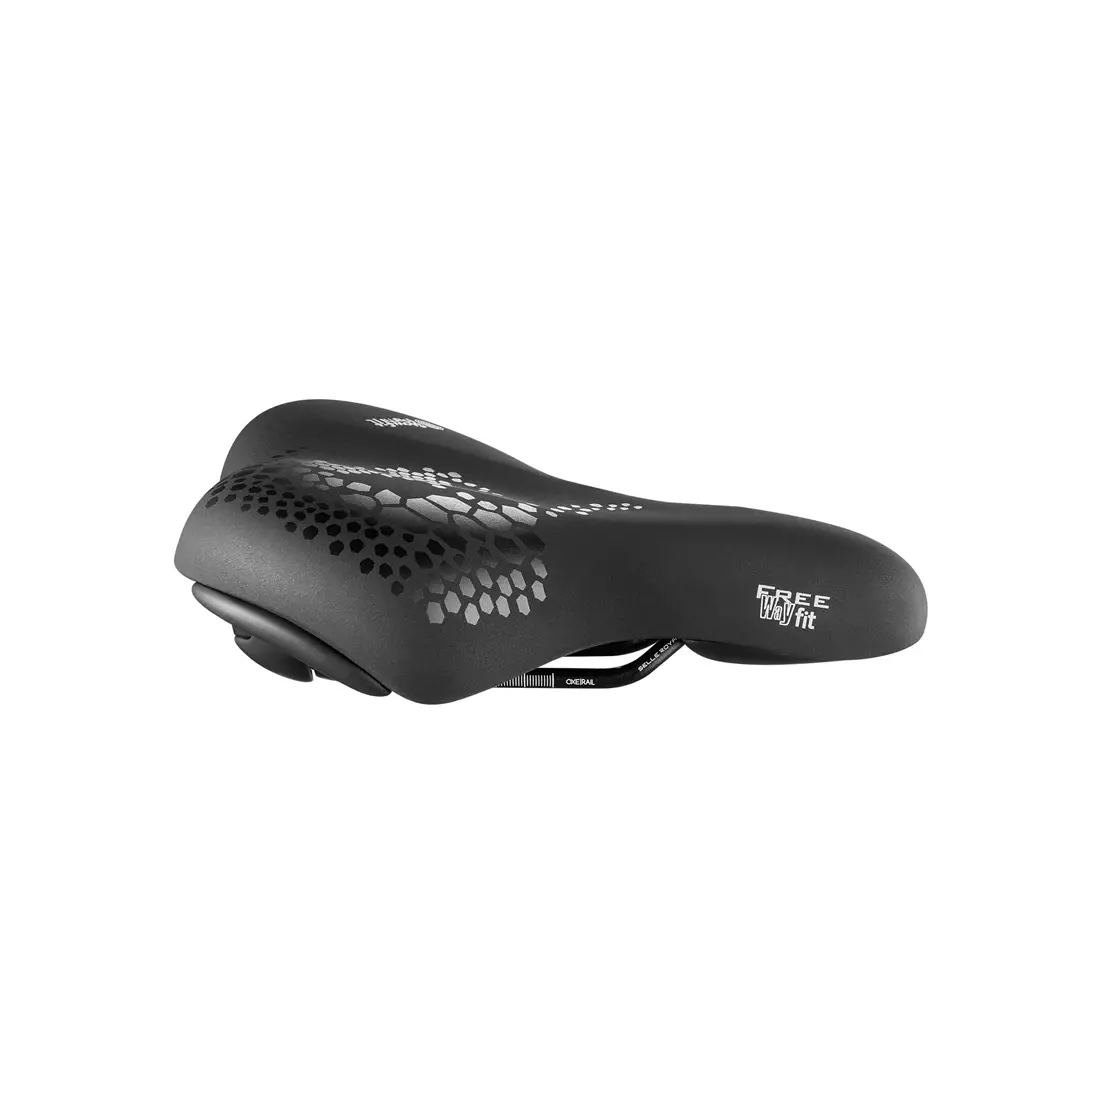 SELLEROYAL CLASSIC RELAXED bicycle saddle 90st. FREEWAY FIT unisex SR-8V98UR0A08069